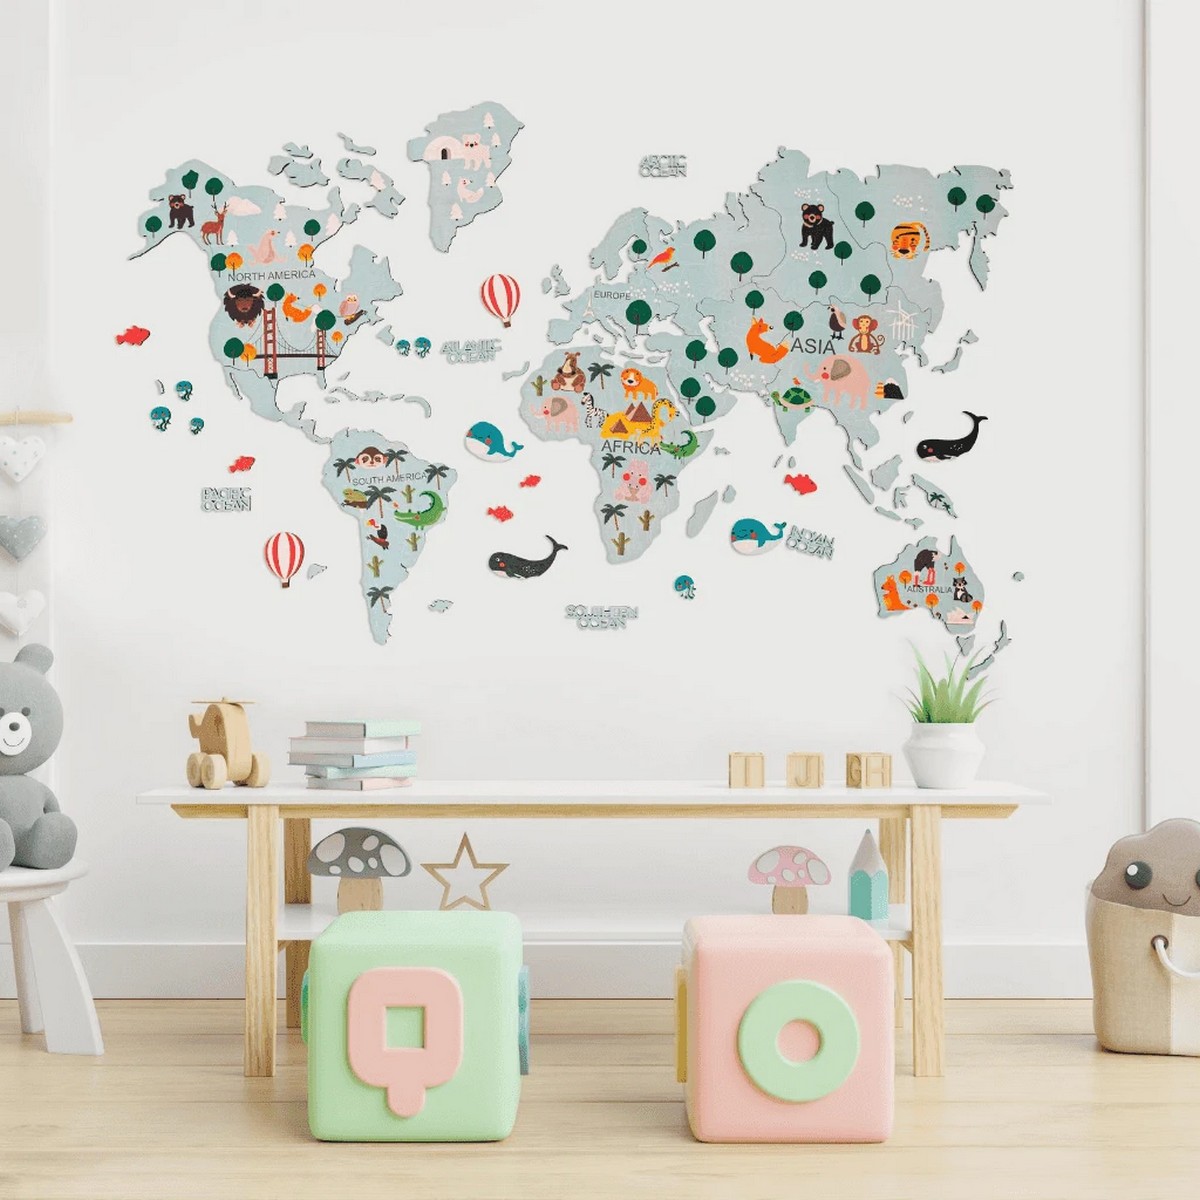 children's world map on the wall